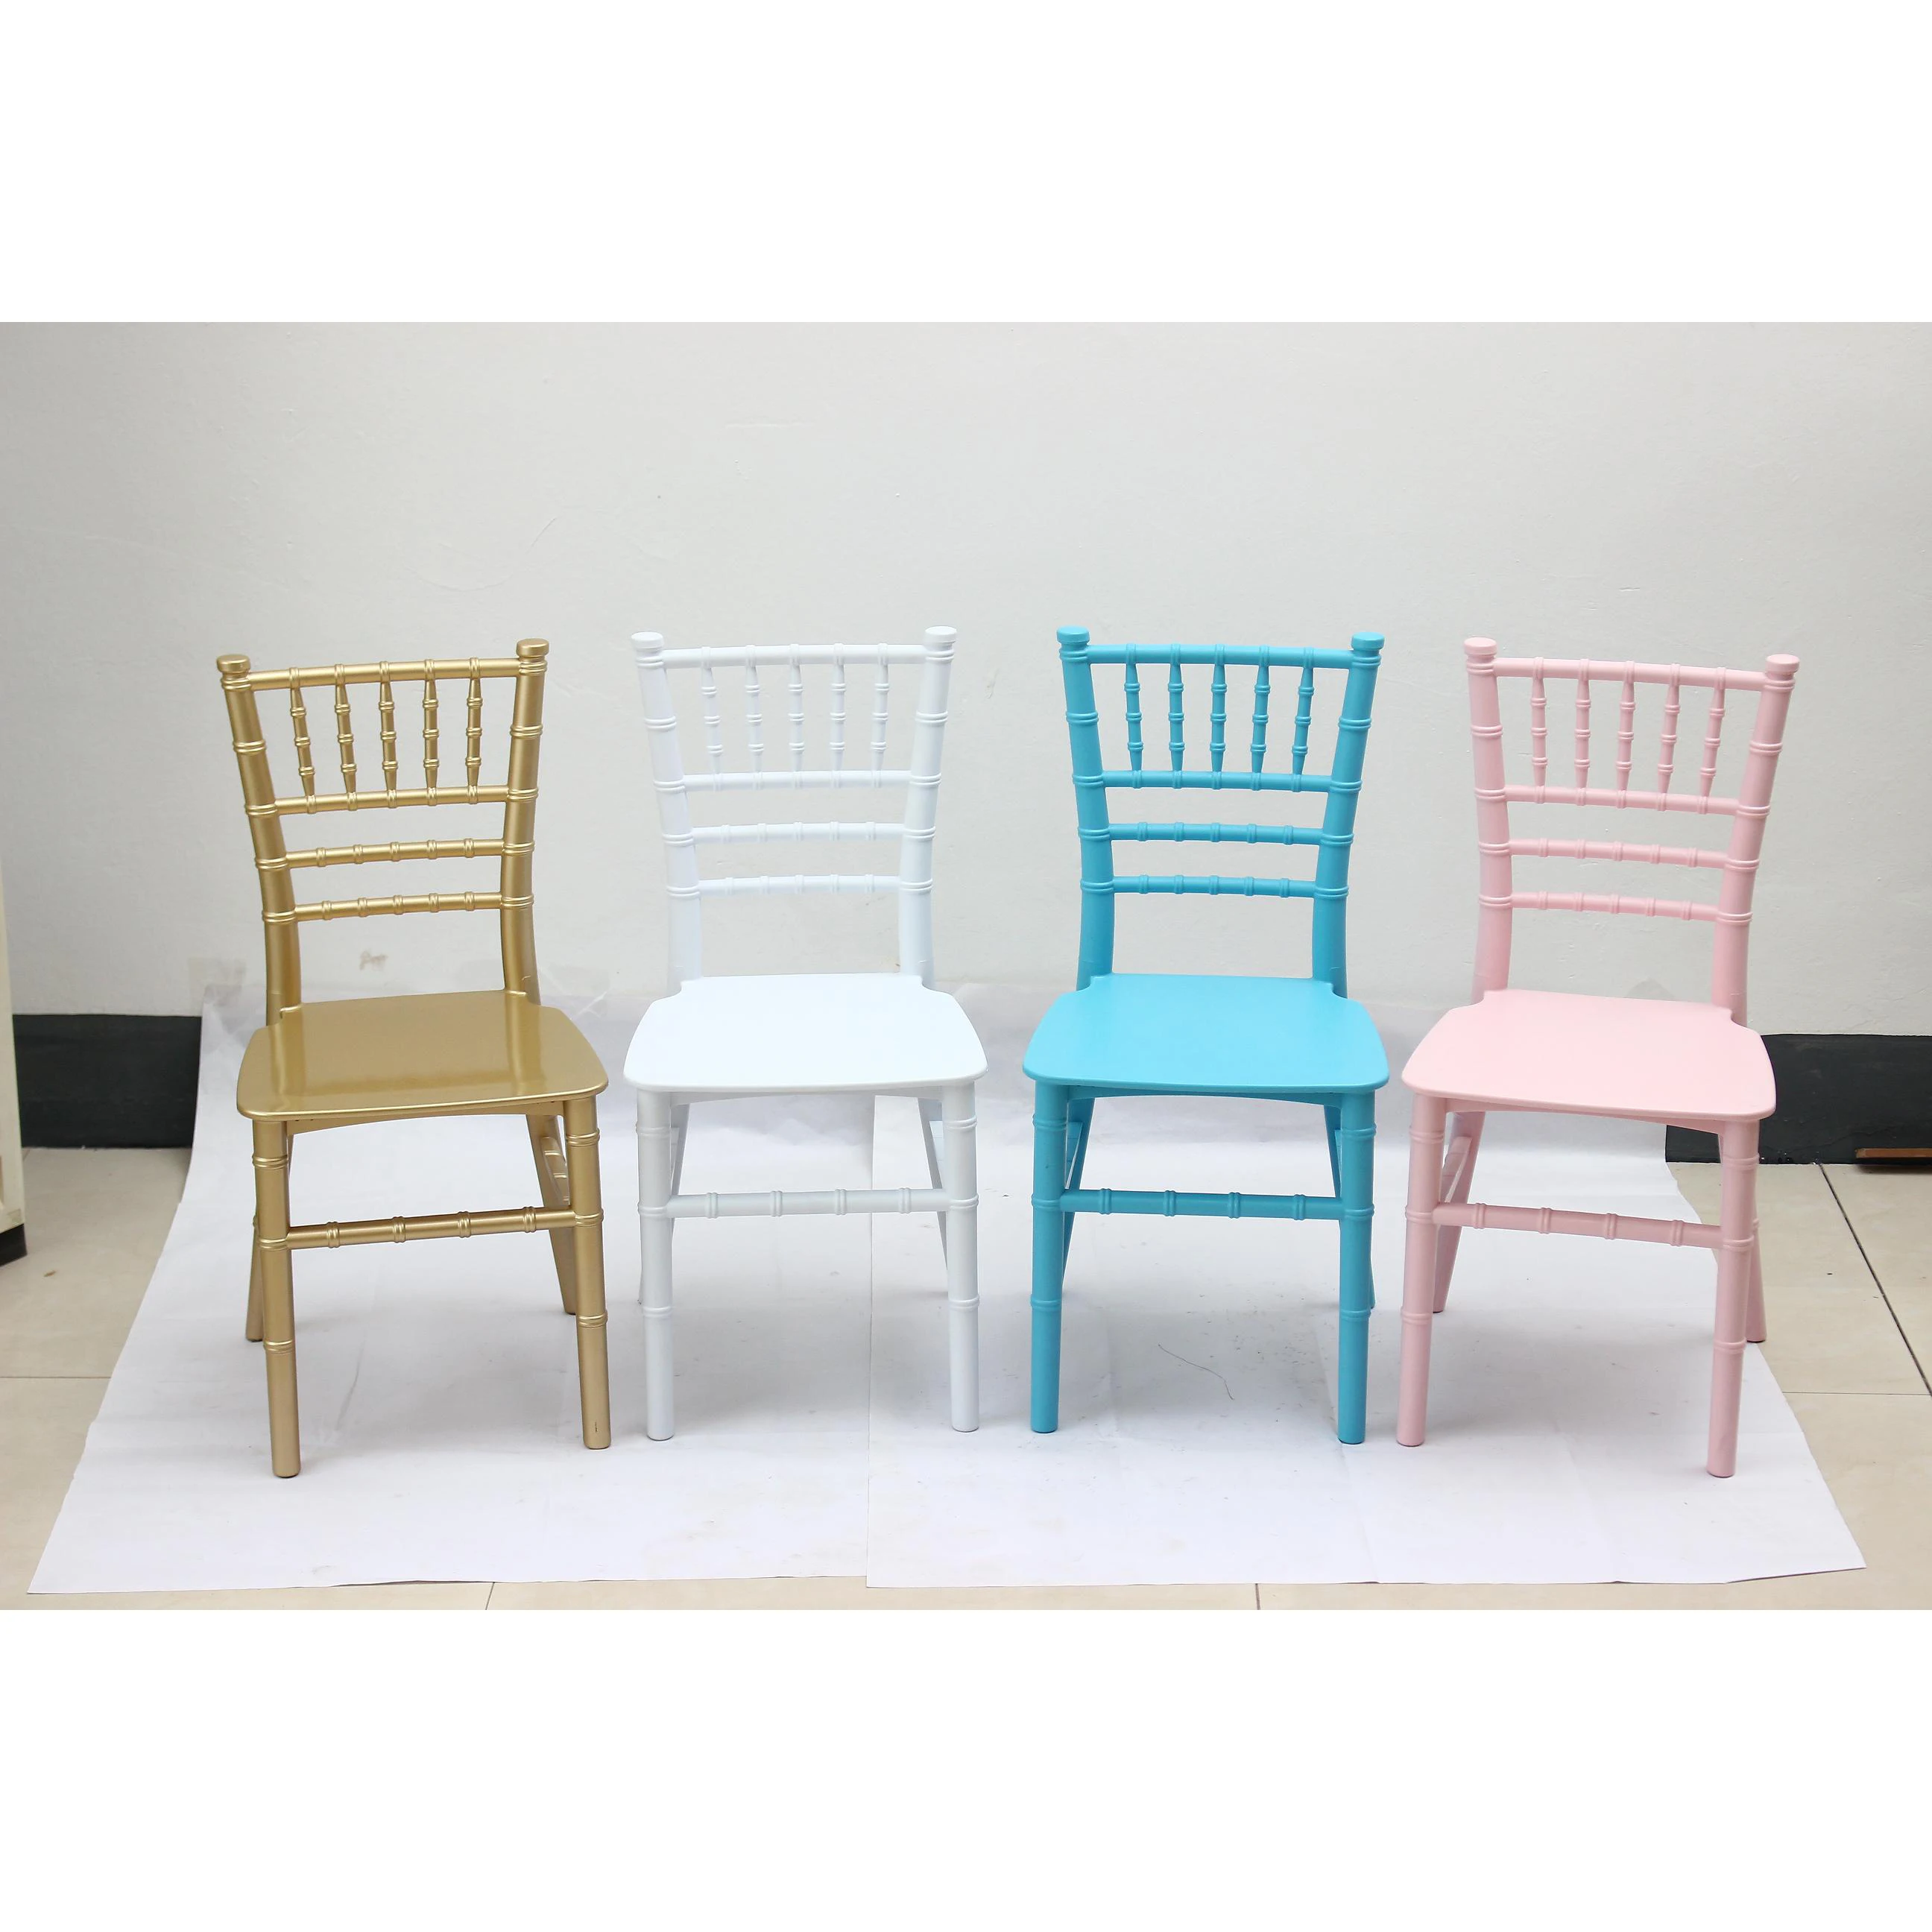 Kids Folding Tables And Chairs For Party Wholesale Price Buy Kids Folding Table And Chair